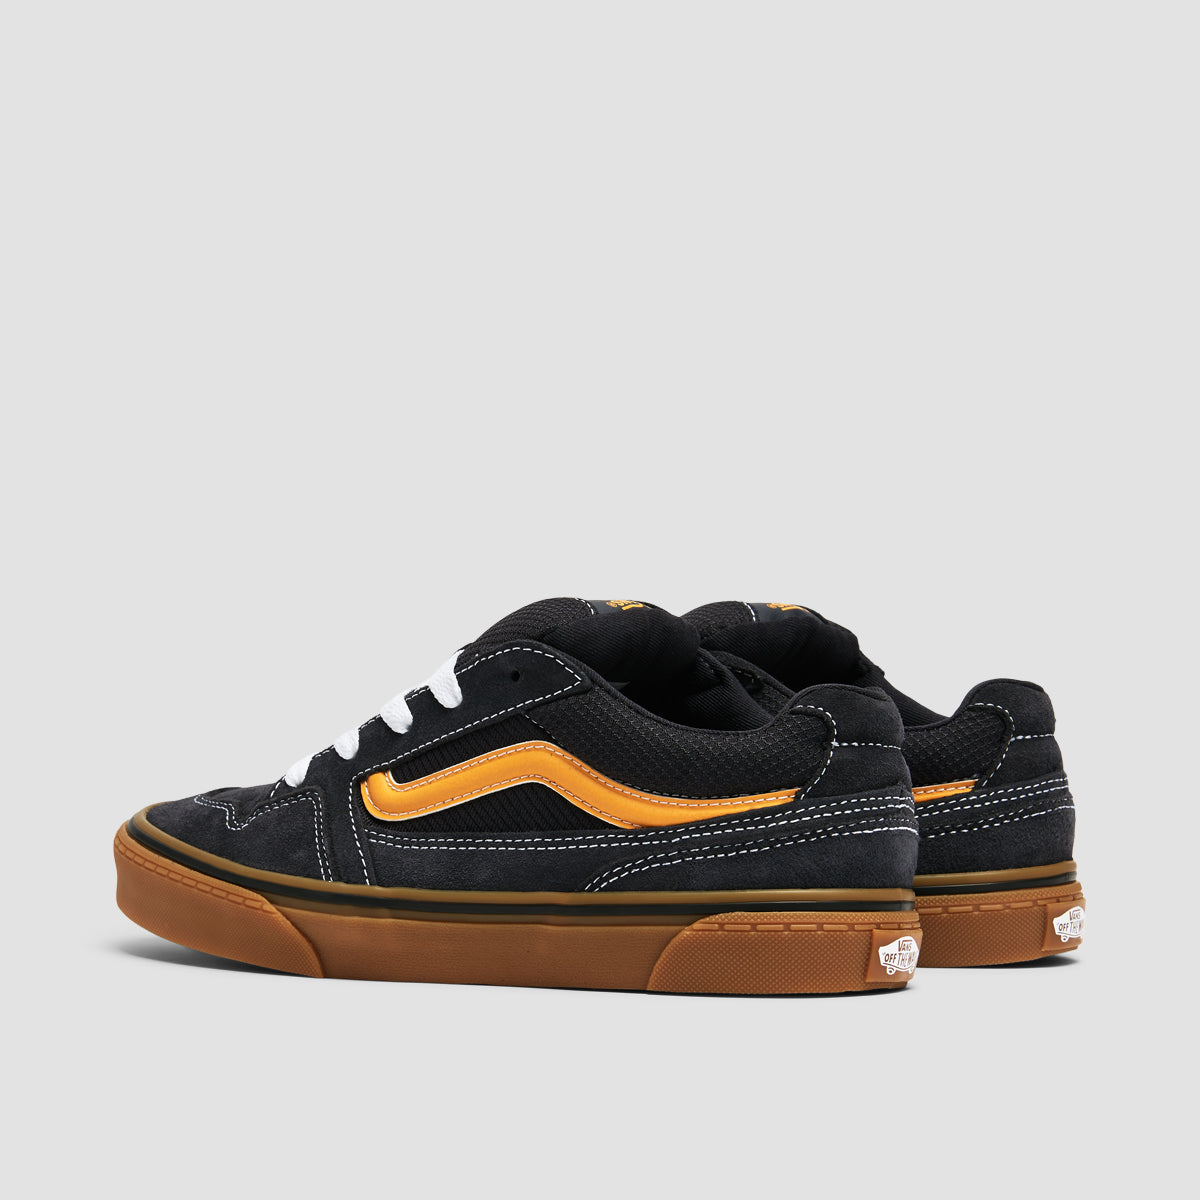 Vans Caldrone Shoes - Suede Gum Charcoal/Yellow - Kids